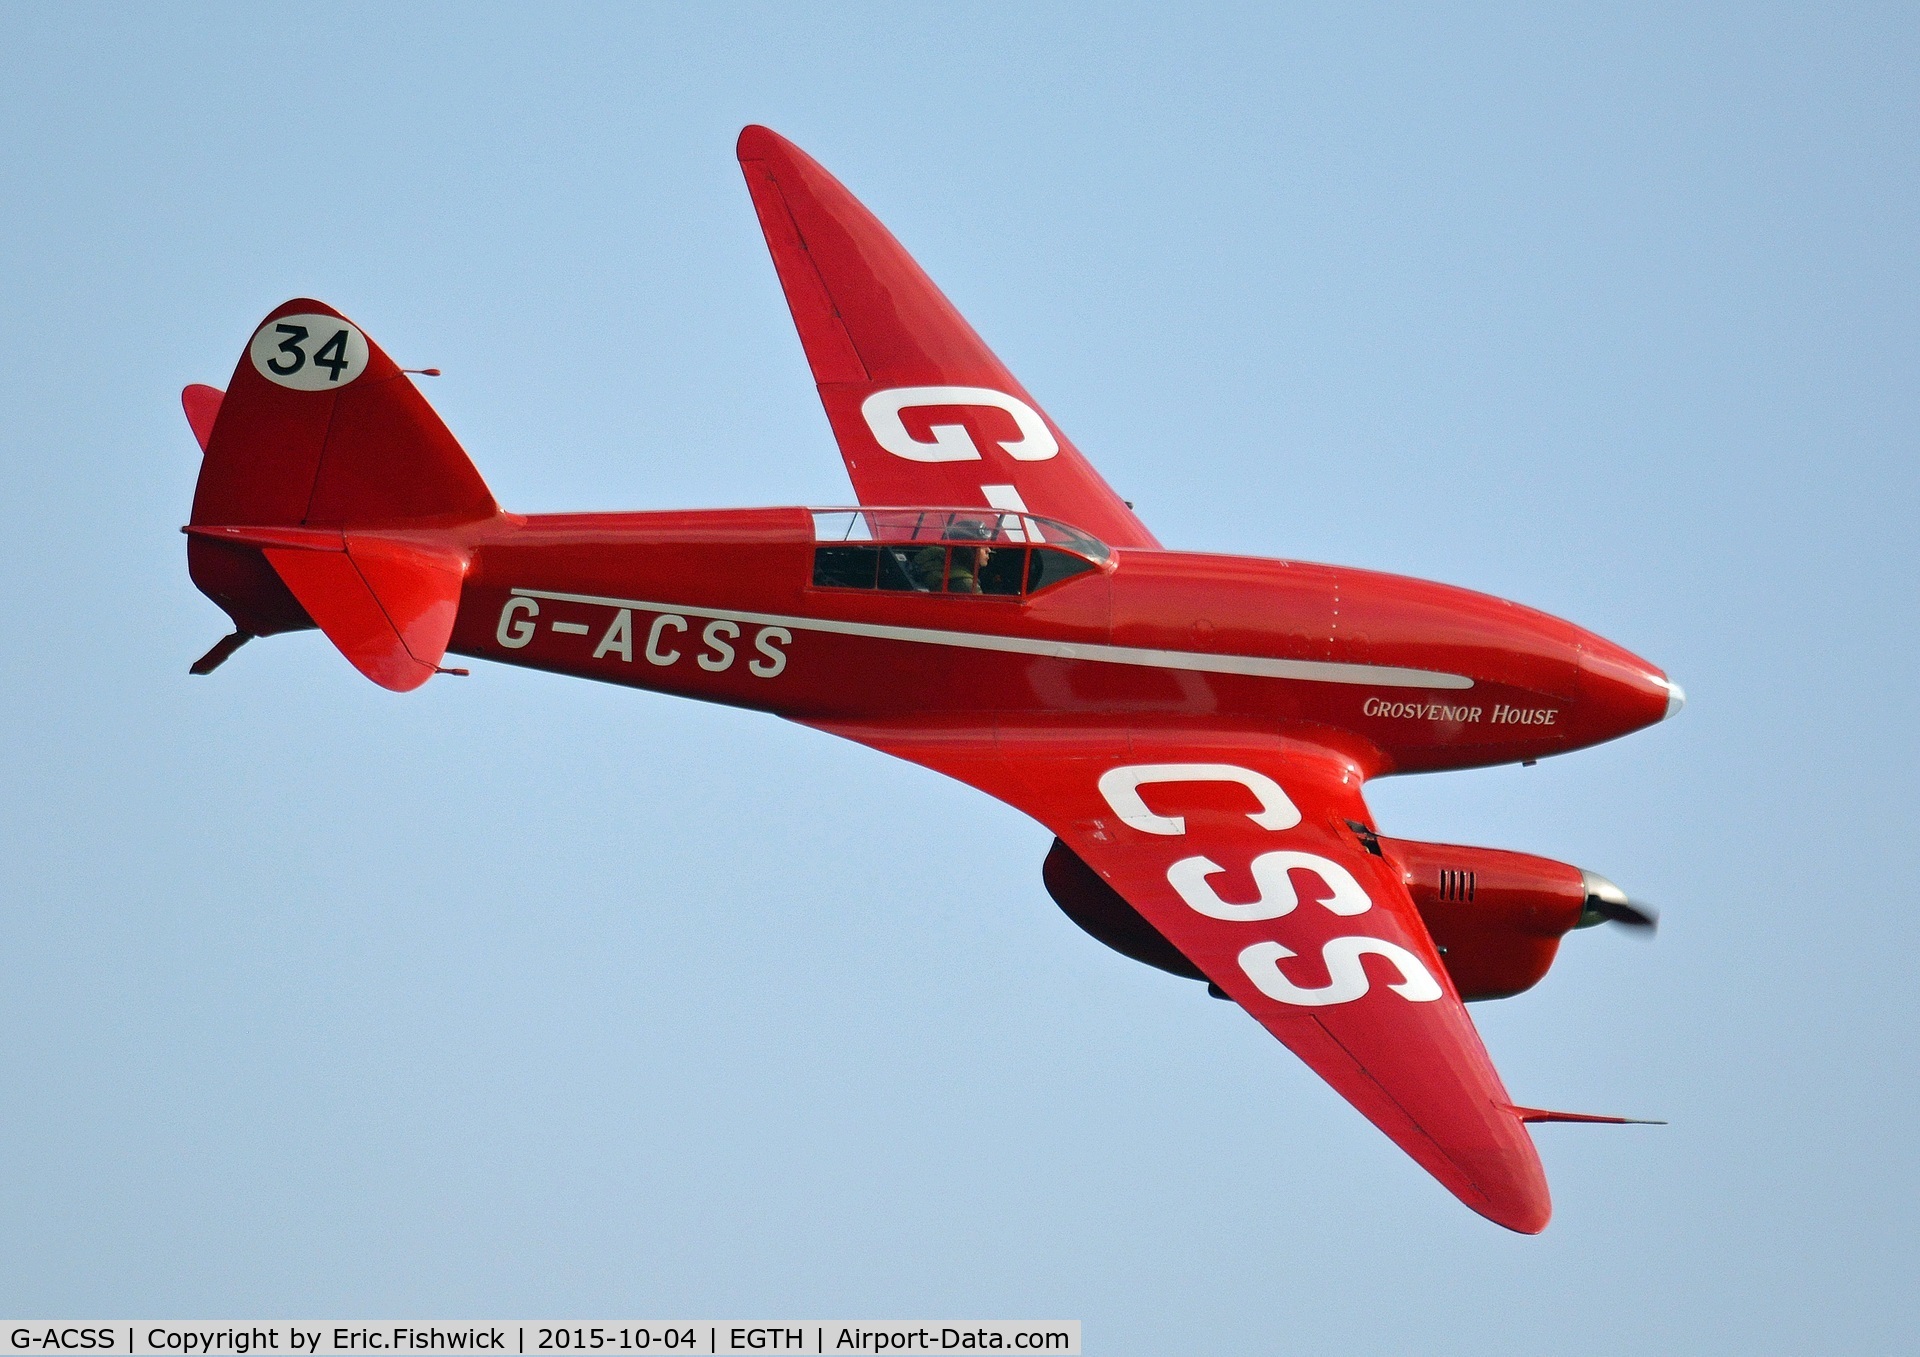 G-ACSS, 1934 De Havilland DH-88 Comet C/N 1996, 42. G-ACSS in display mode at The Shuttleworth 'Uncovered' Airshow (Finale,) Oct. 2015.